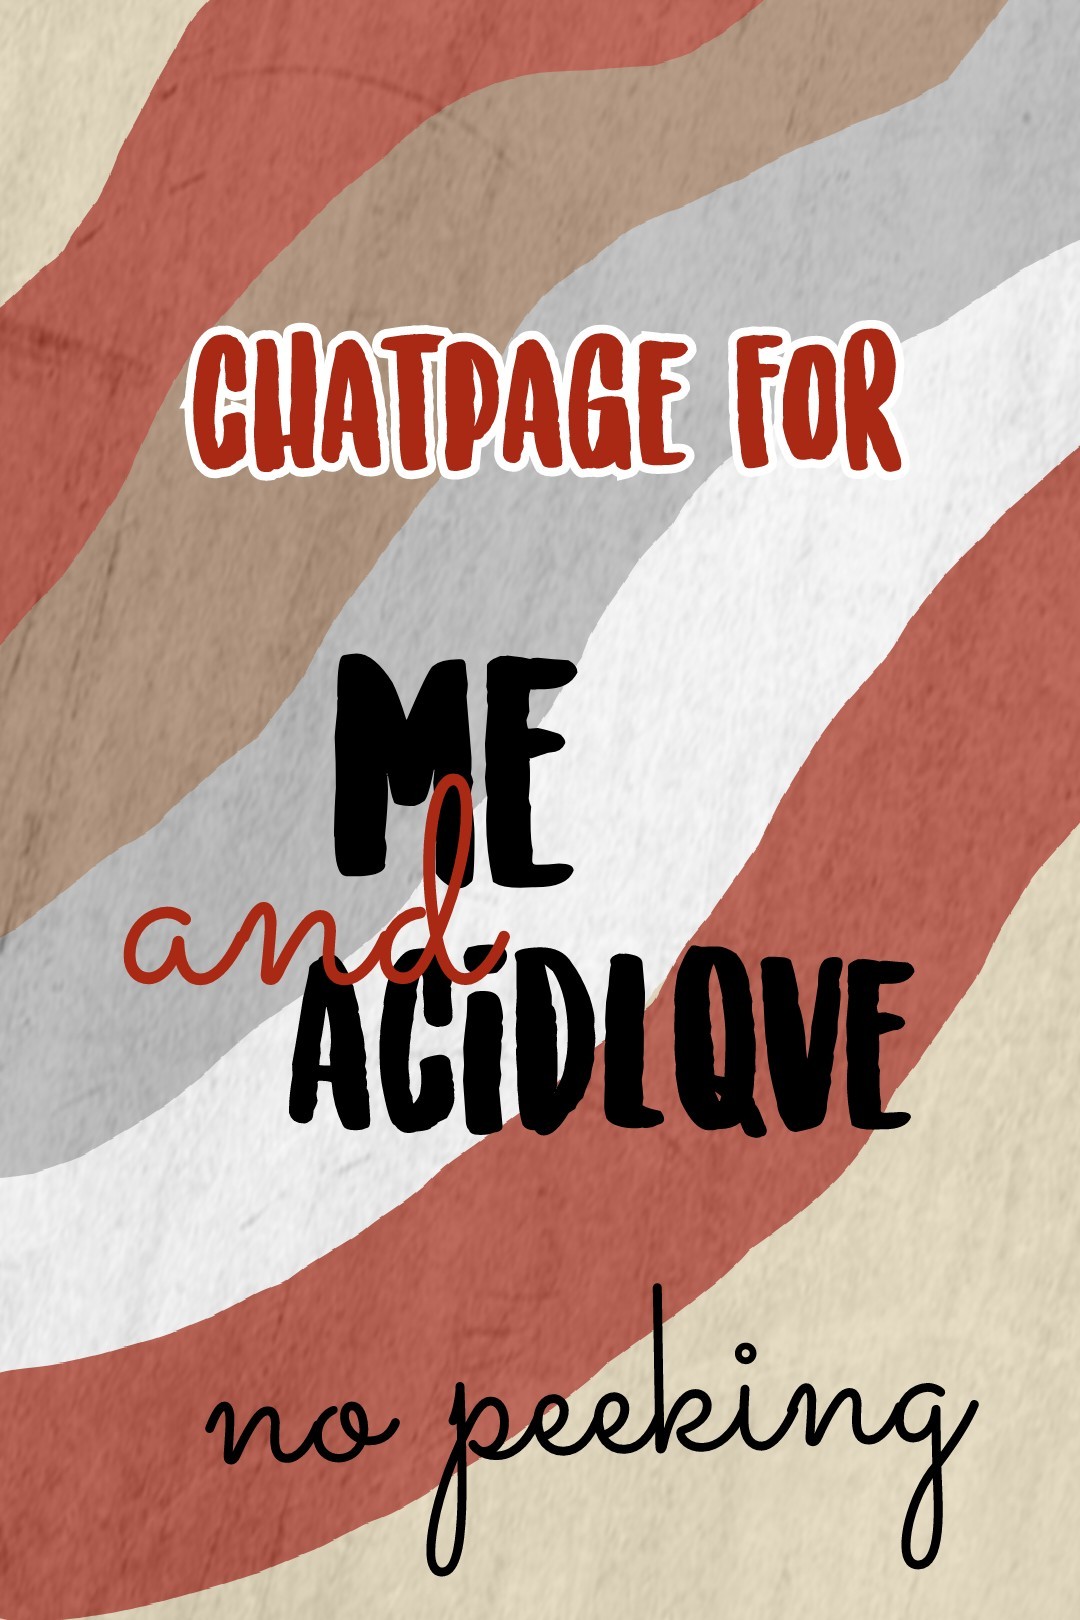 chatepage for me and acidlqve